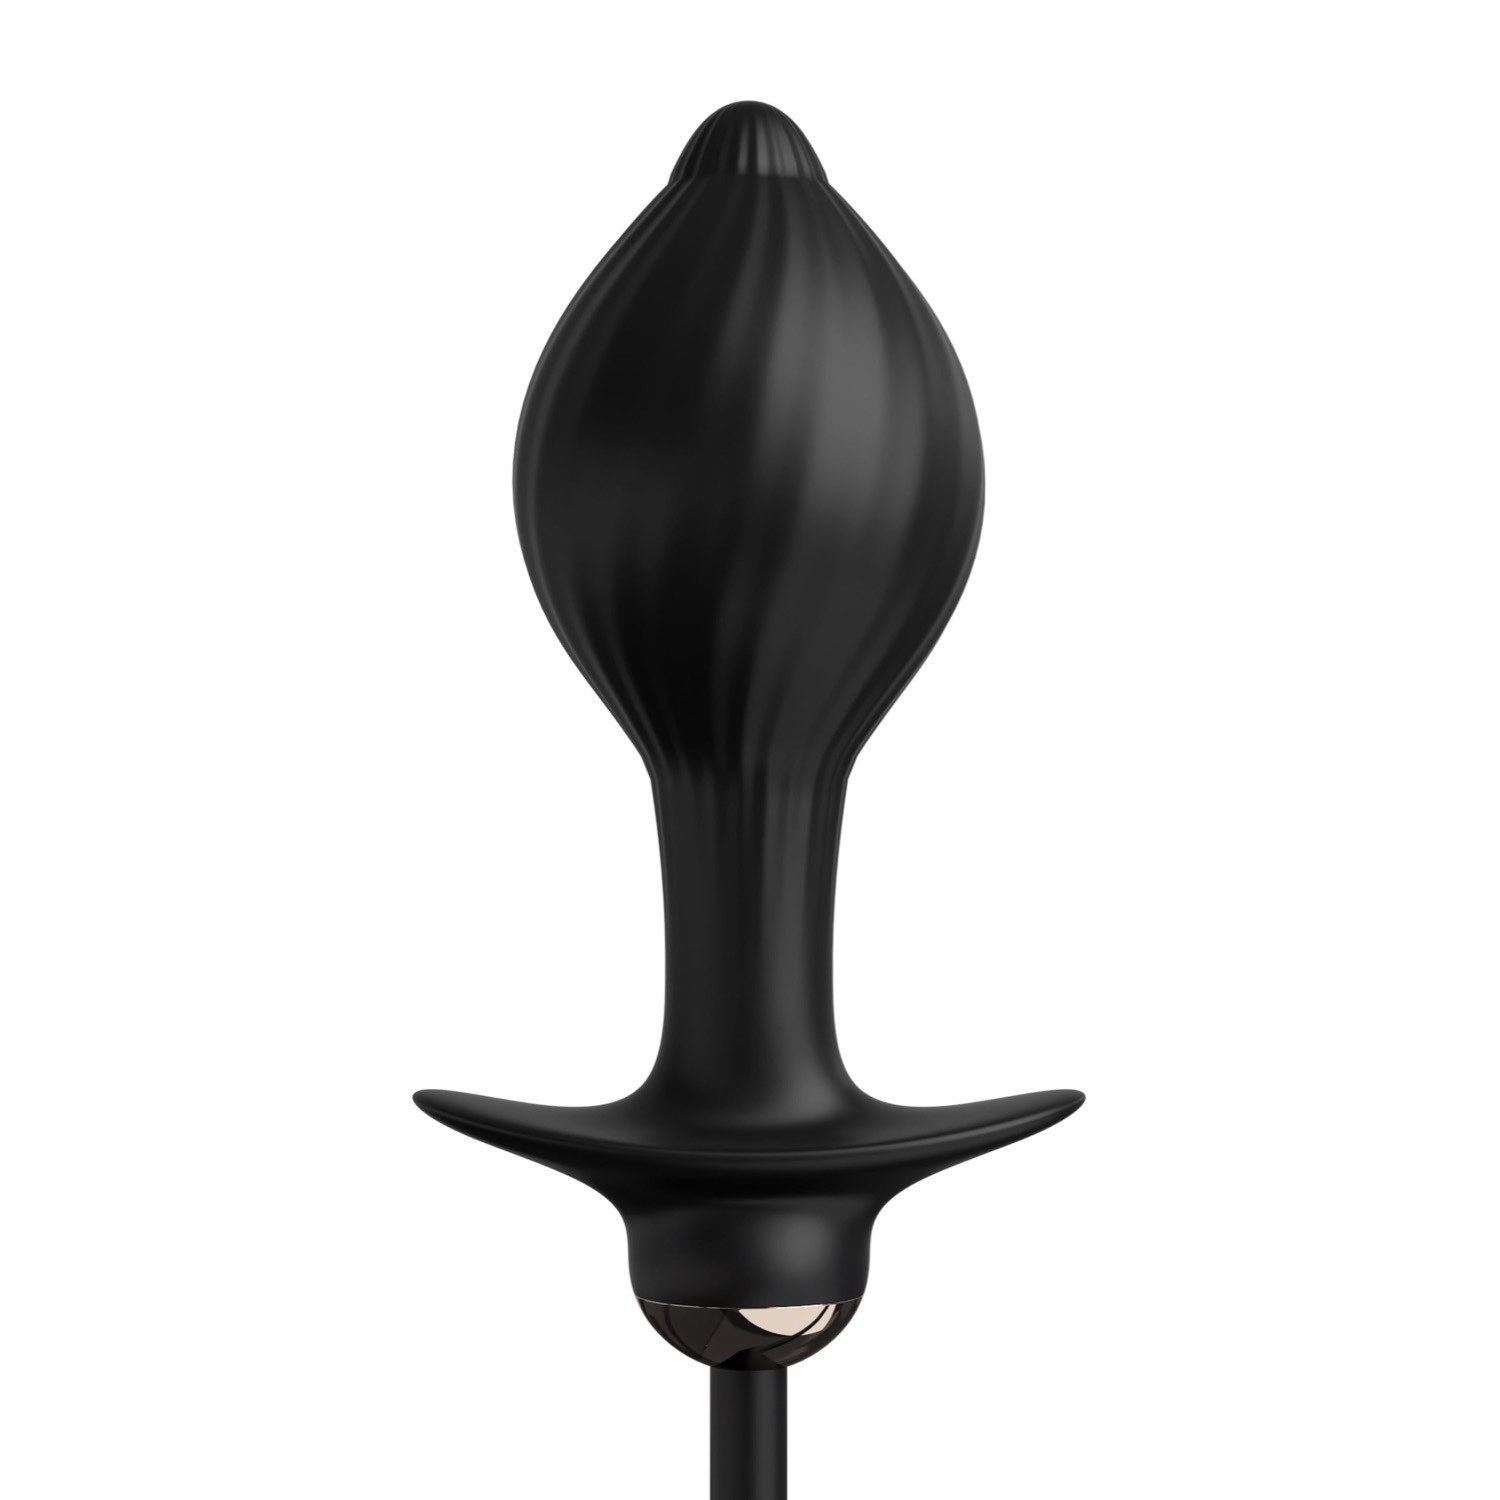 Anal Fantasy Elite Auto Throb Inflatable Vibrating Plug - Black 13 cm USB Rechargeable Inflatating Butt Plug by Pipedream